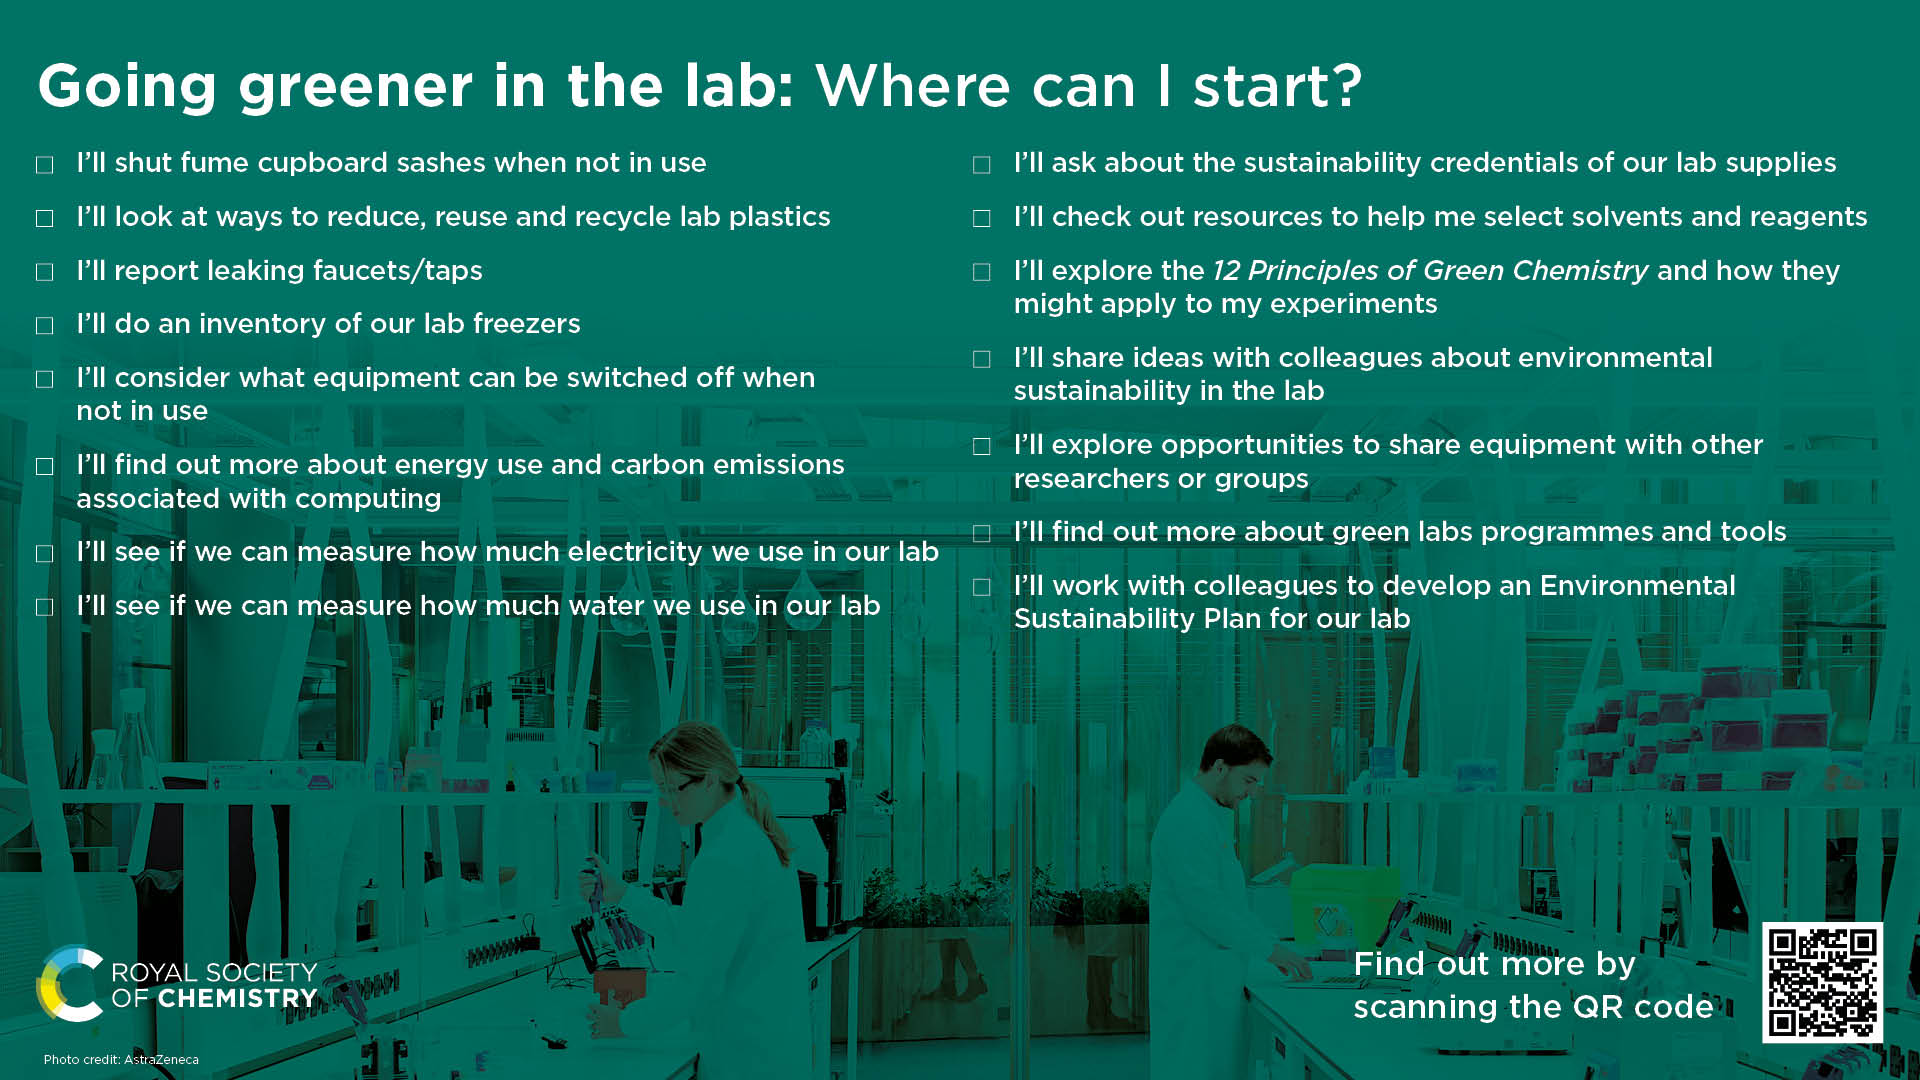 Going greener in the lab - where can I start.jpg